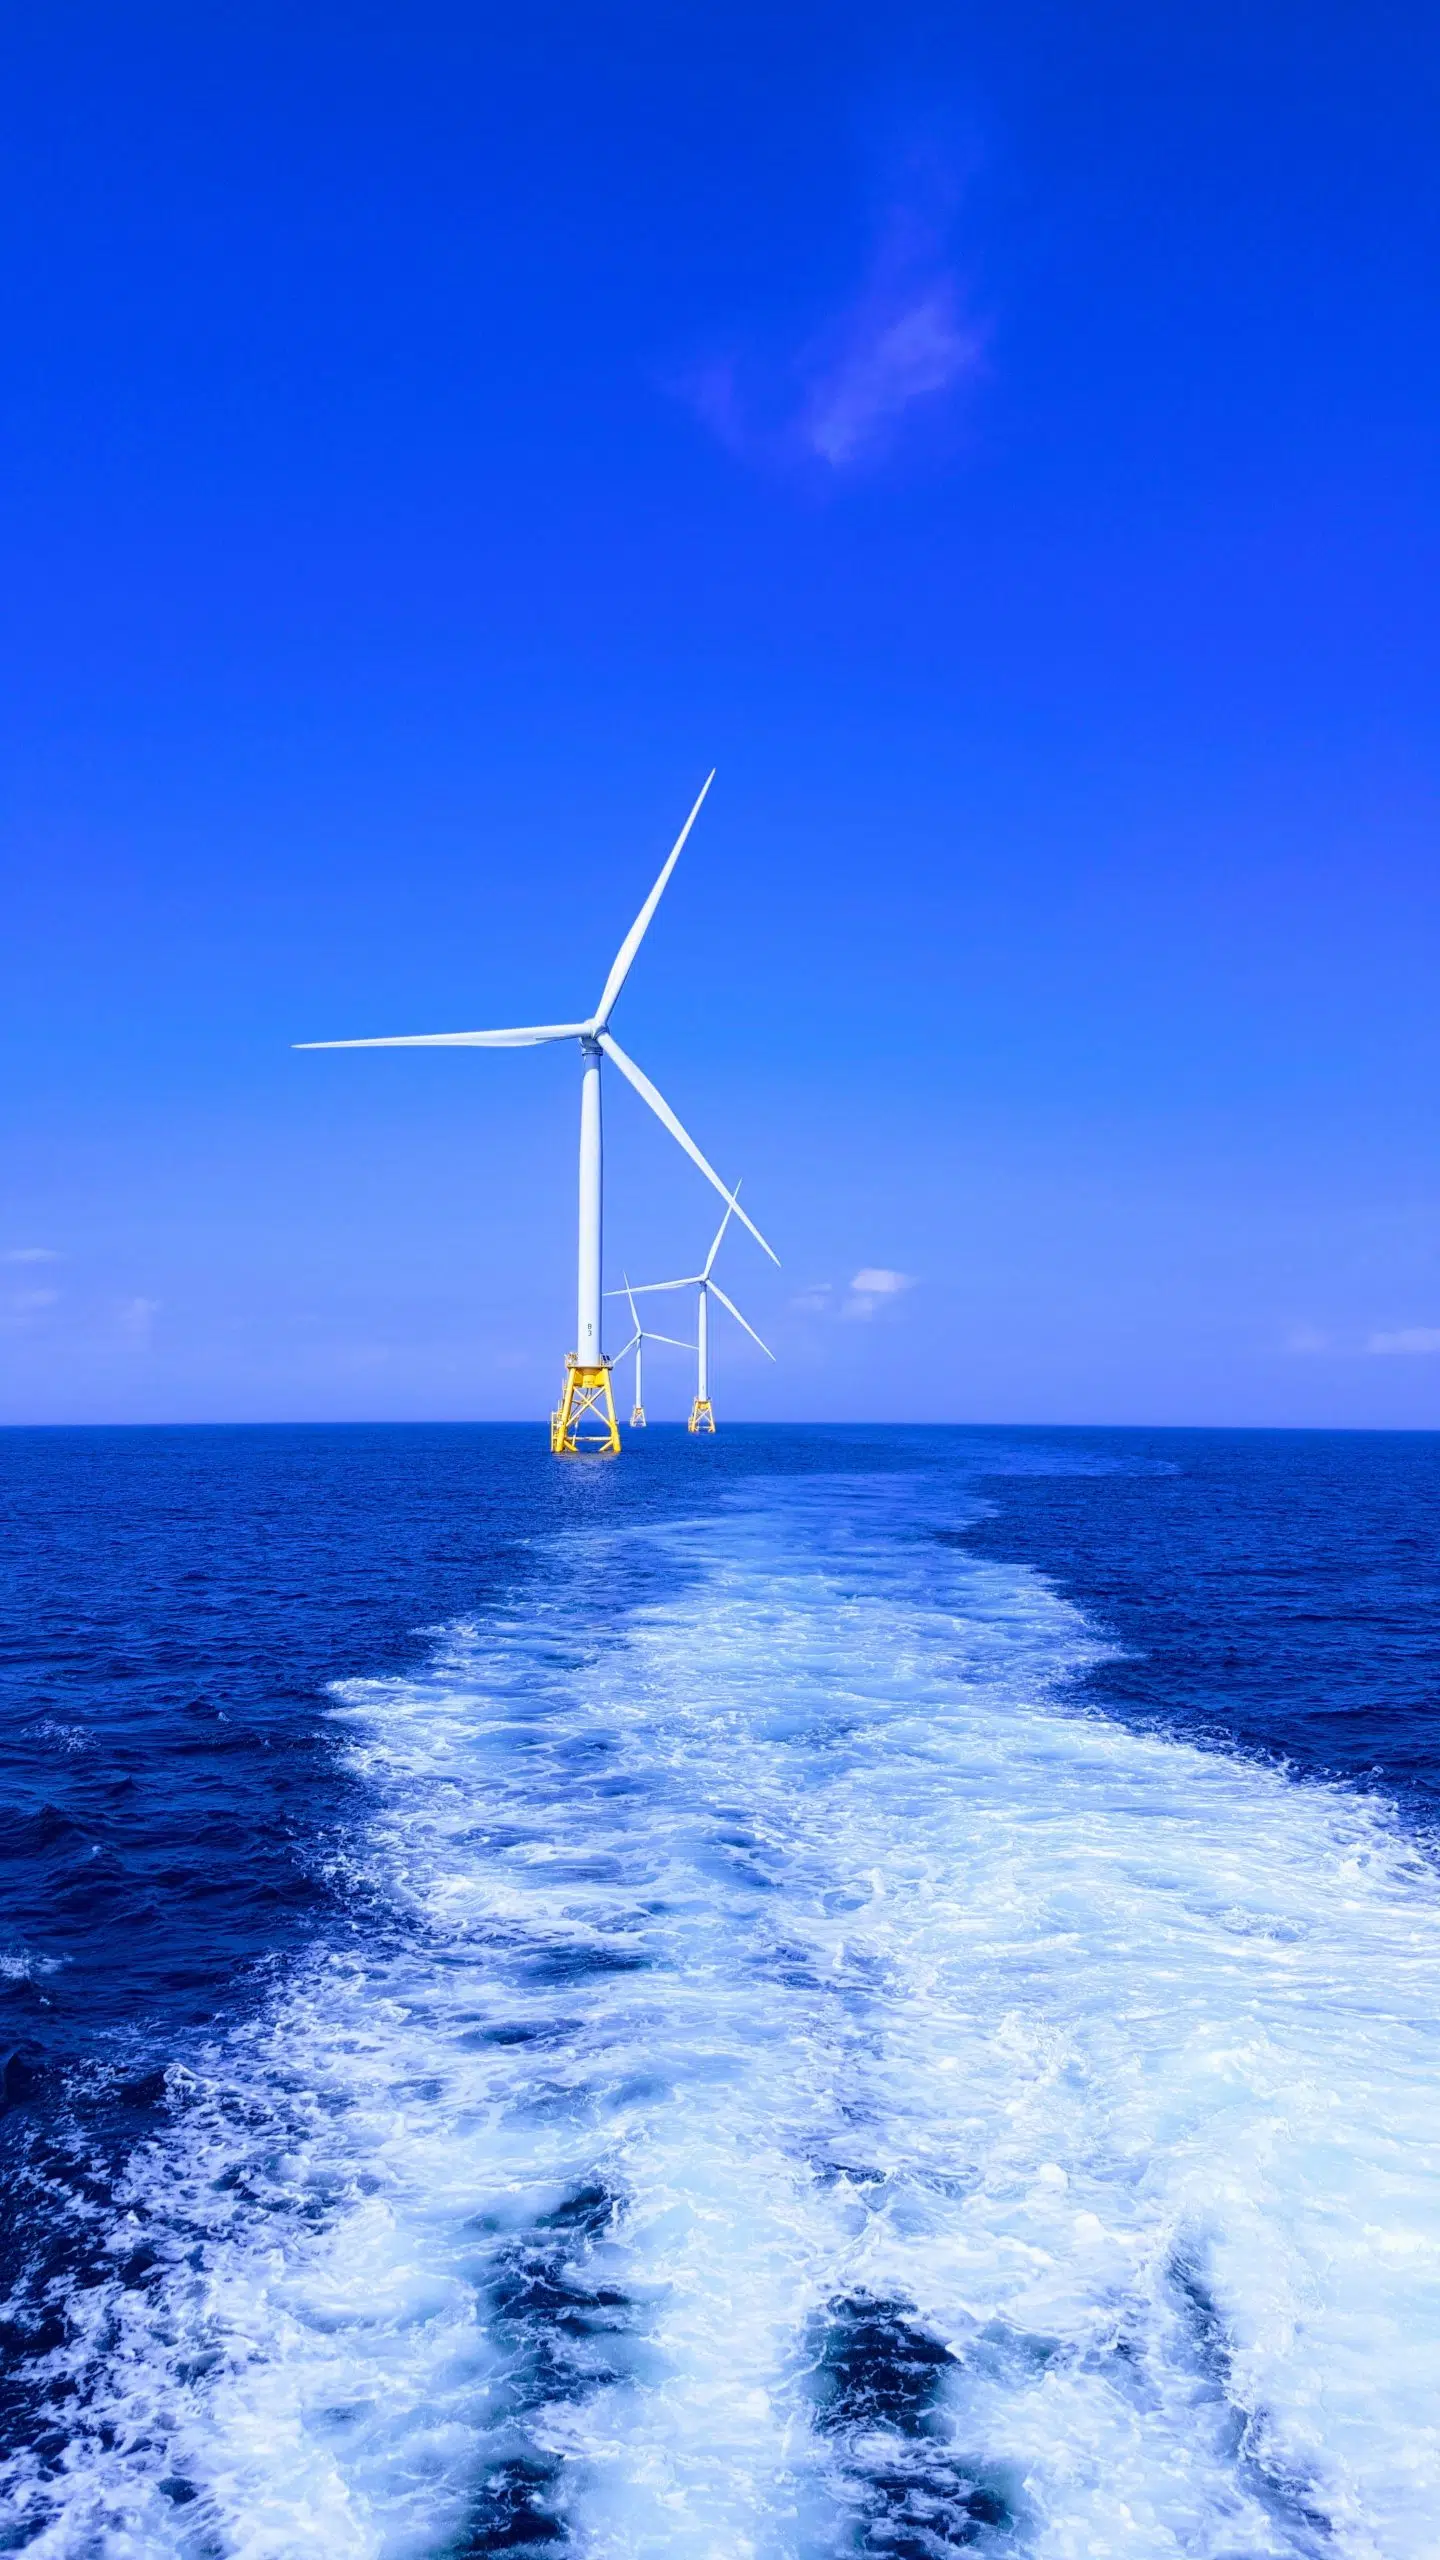 Federal government opens Gulf of Mexico offshore wind lease auction for first time today